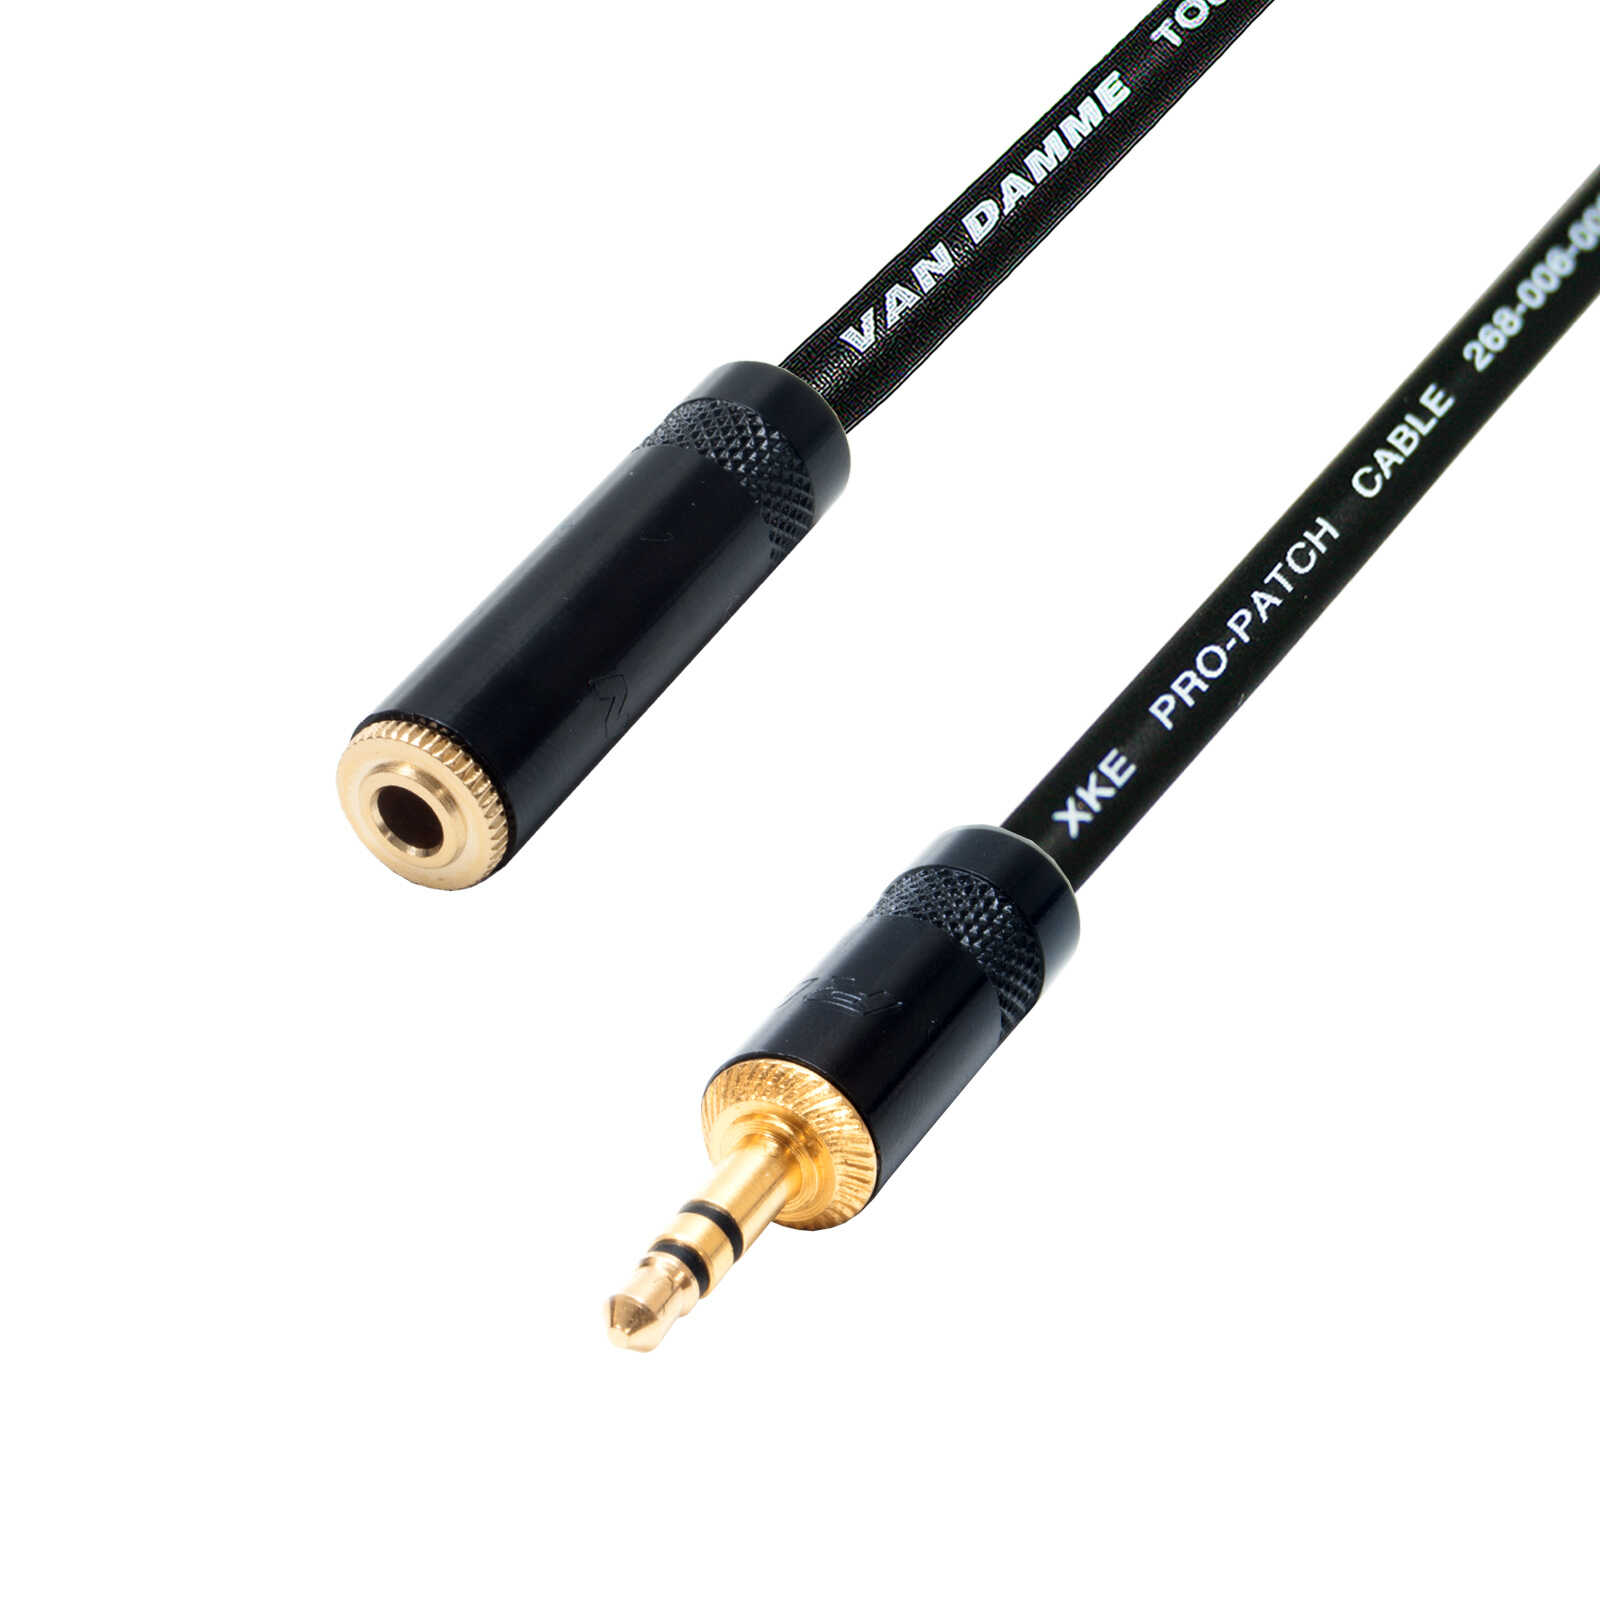 Headphone Extension Cable. 3.5mm Stereo Mini Jack to Female Lead